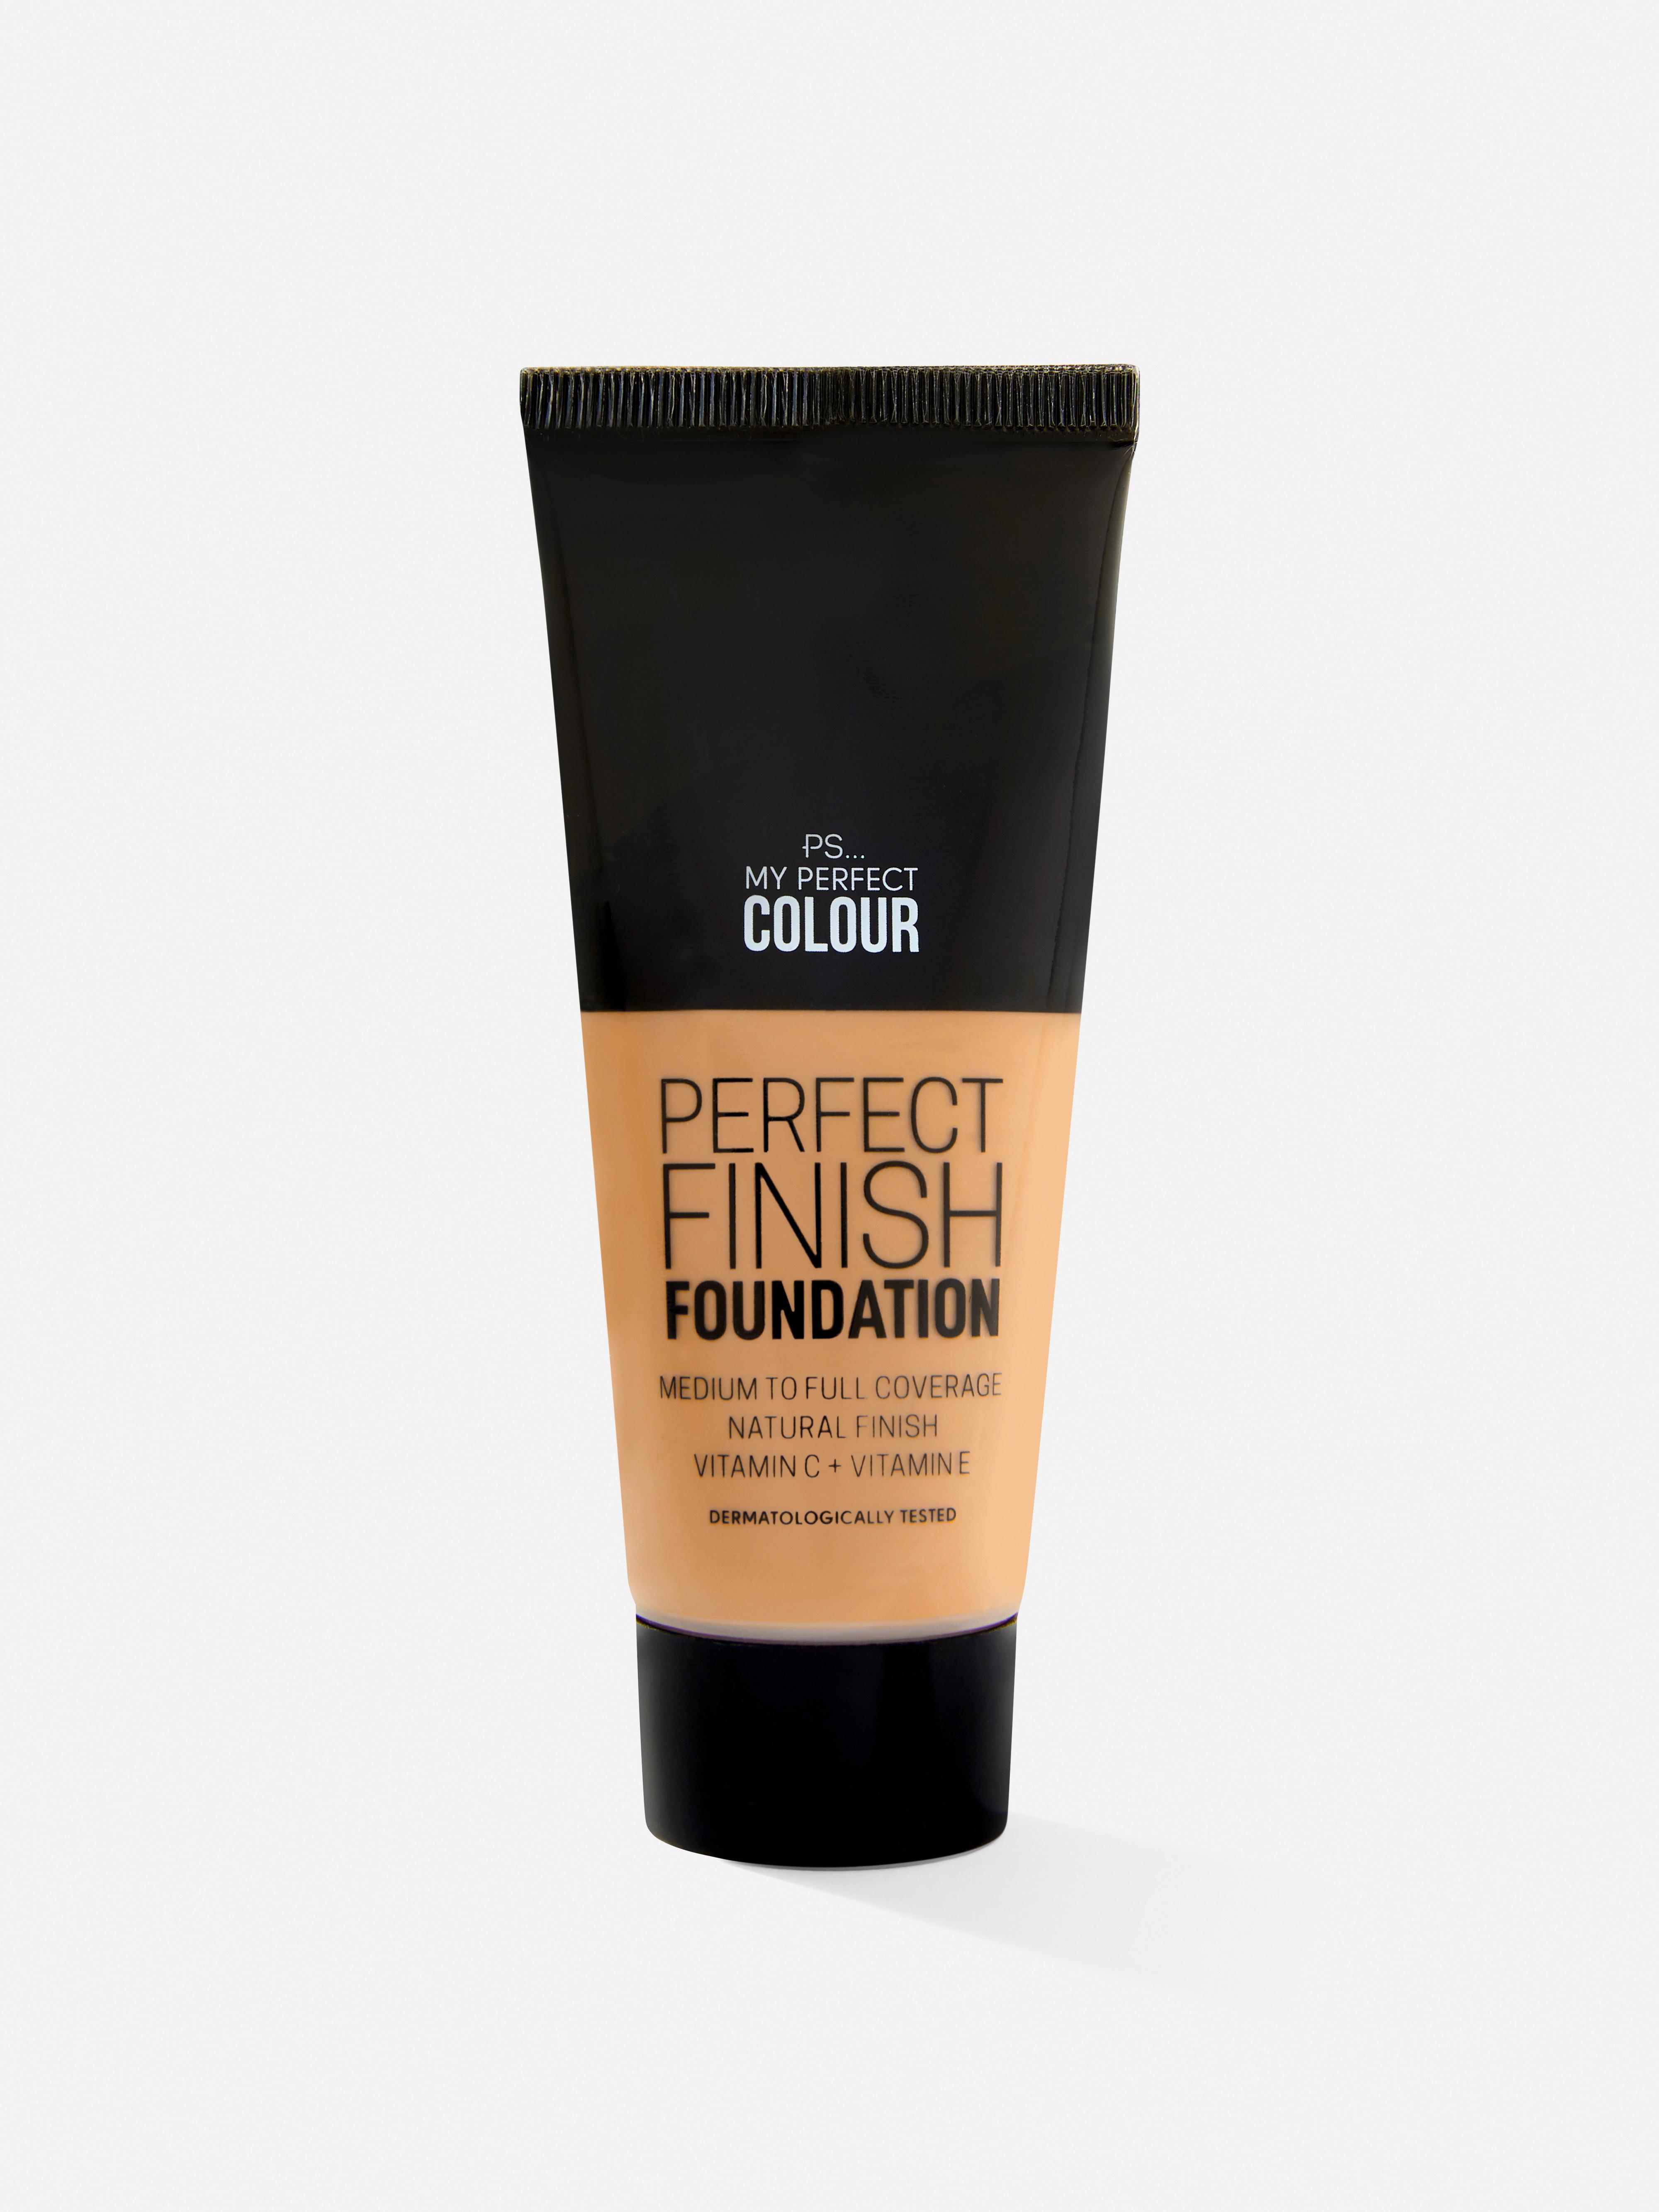 PS... My Perfect Colour Finish Foundation